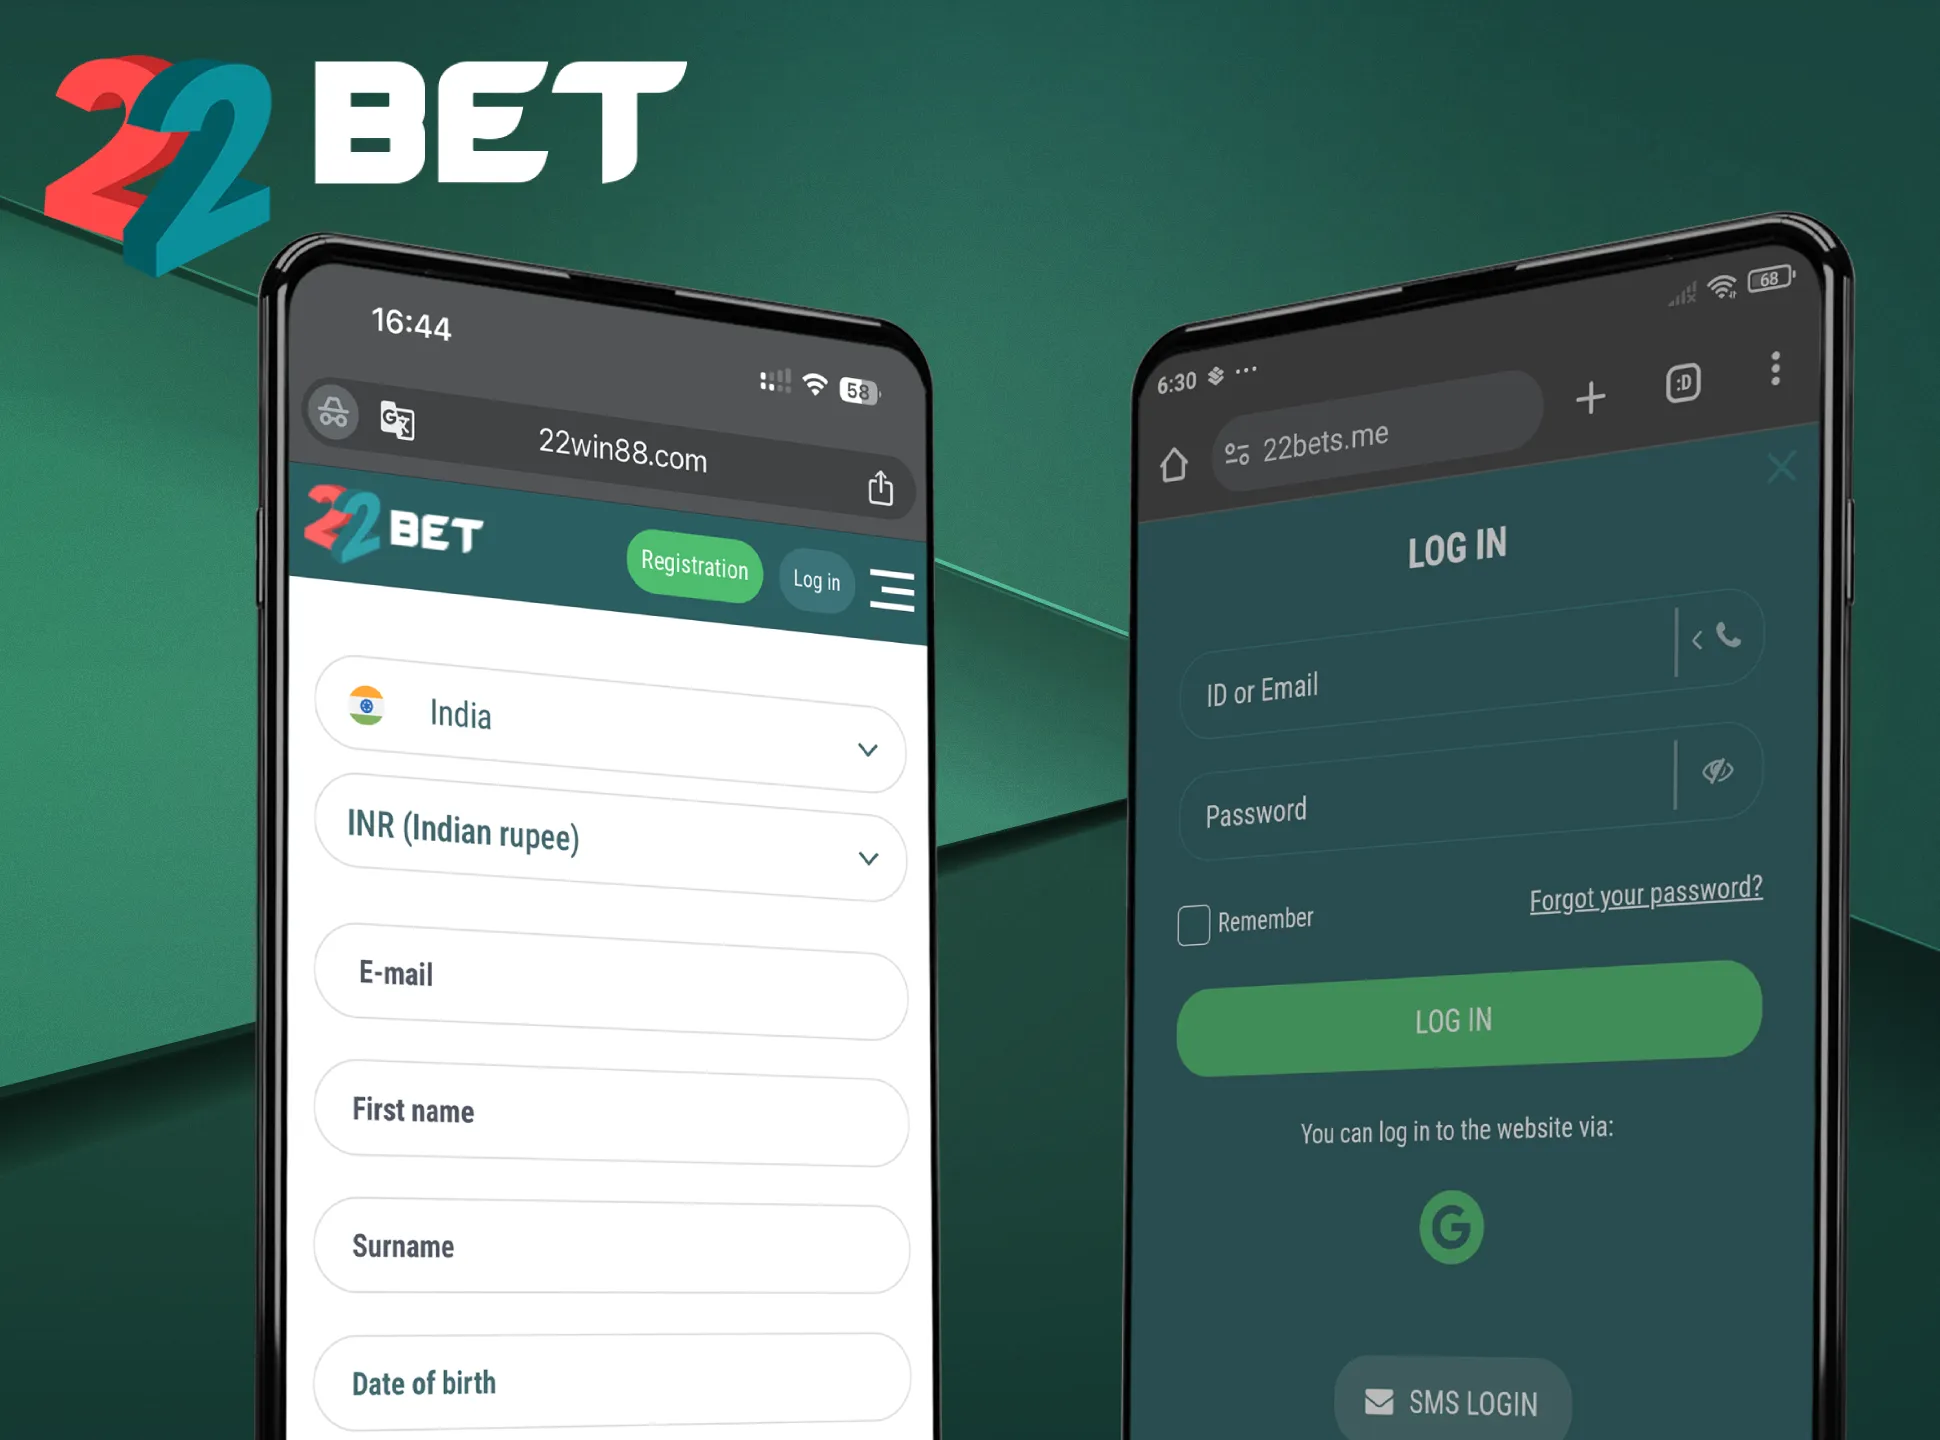 Log in to your account or register on the 22Bet app.